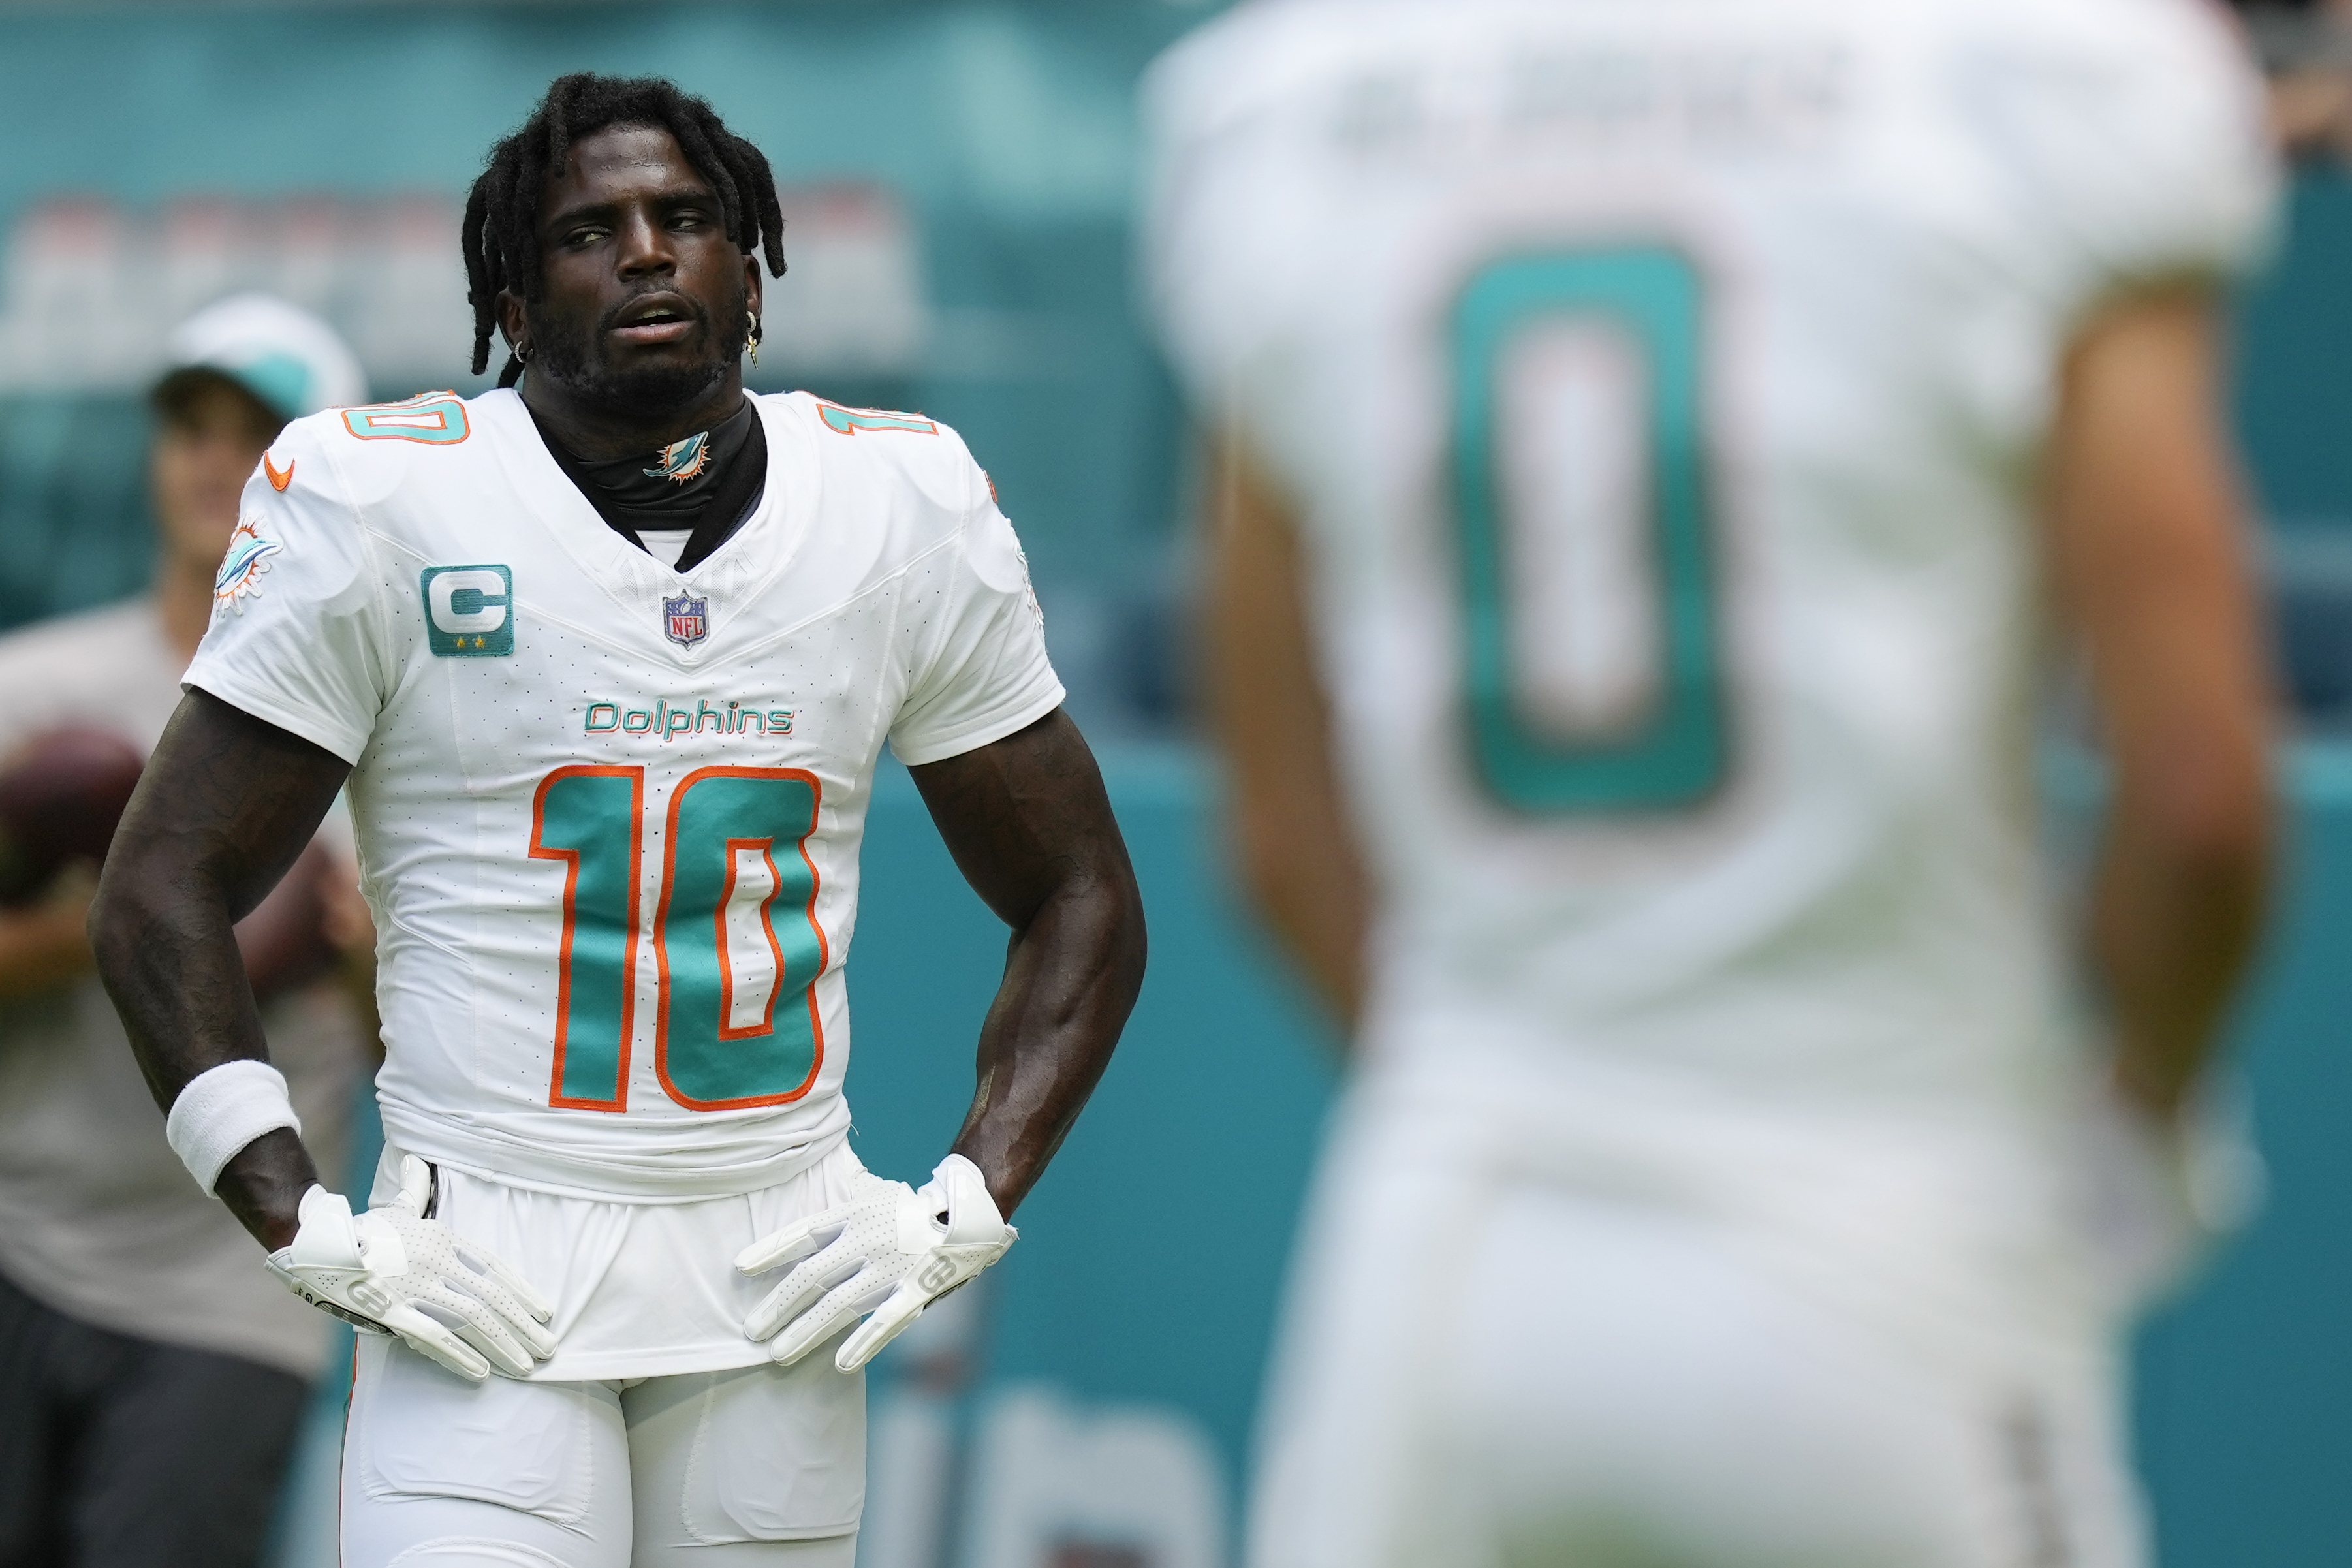 Mac Jones has fan in Dolphins WR: 'He's a heck of a competitor' 